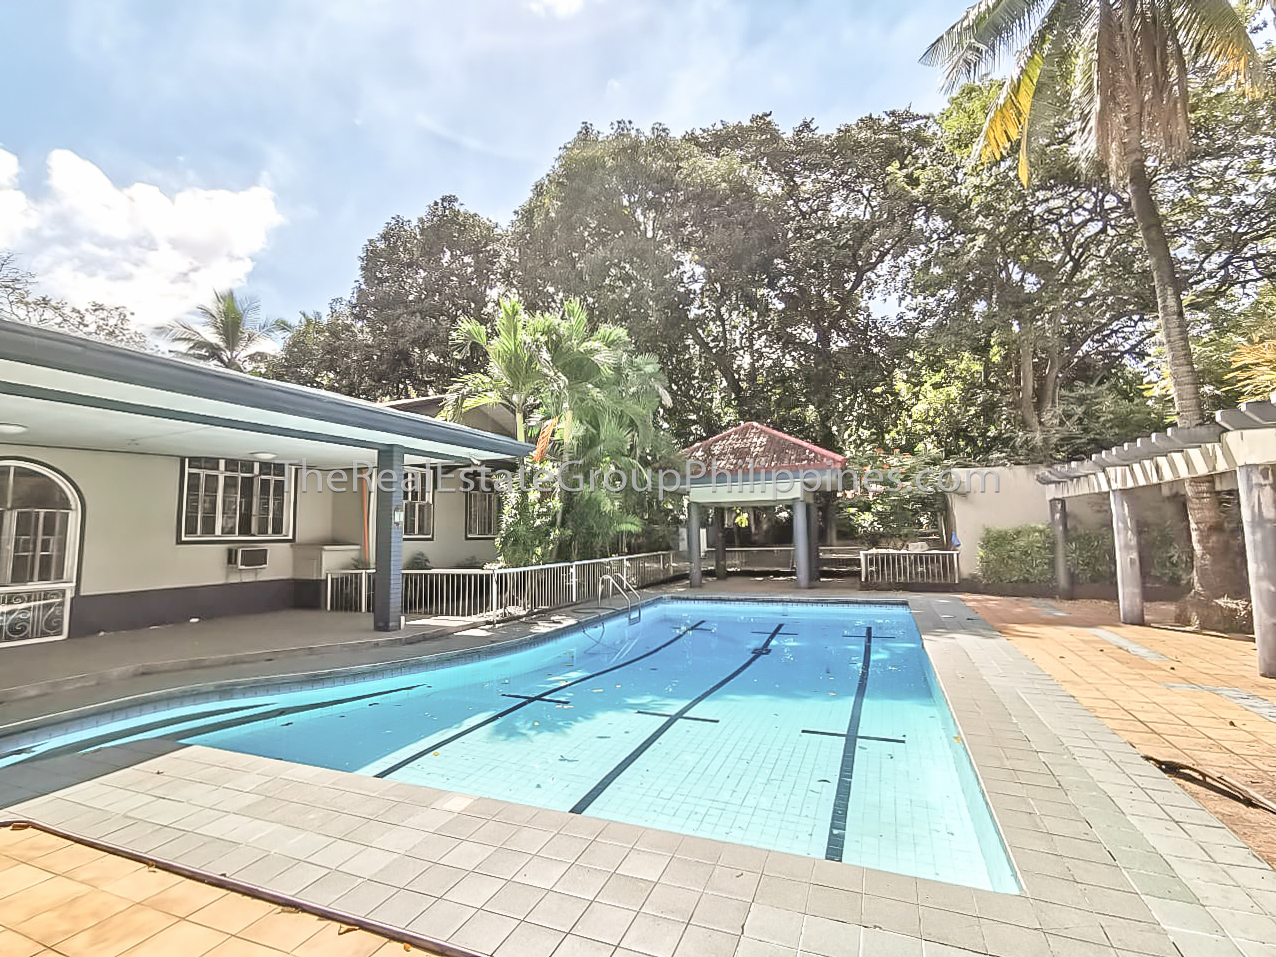 5BR House For Sale, Forbes Park Village, Makati-1